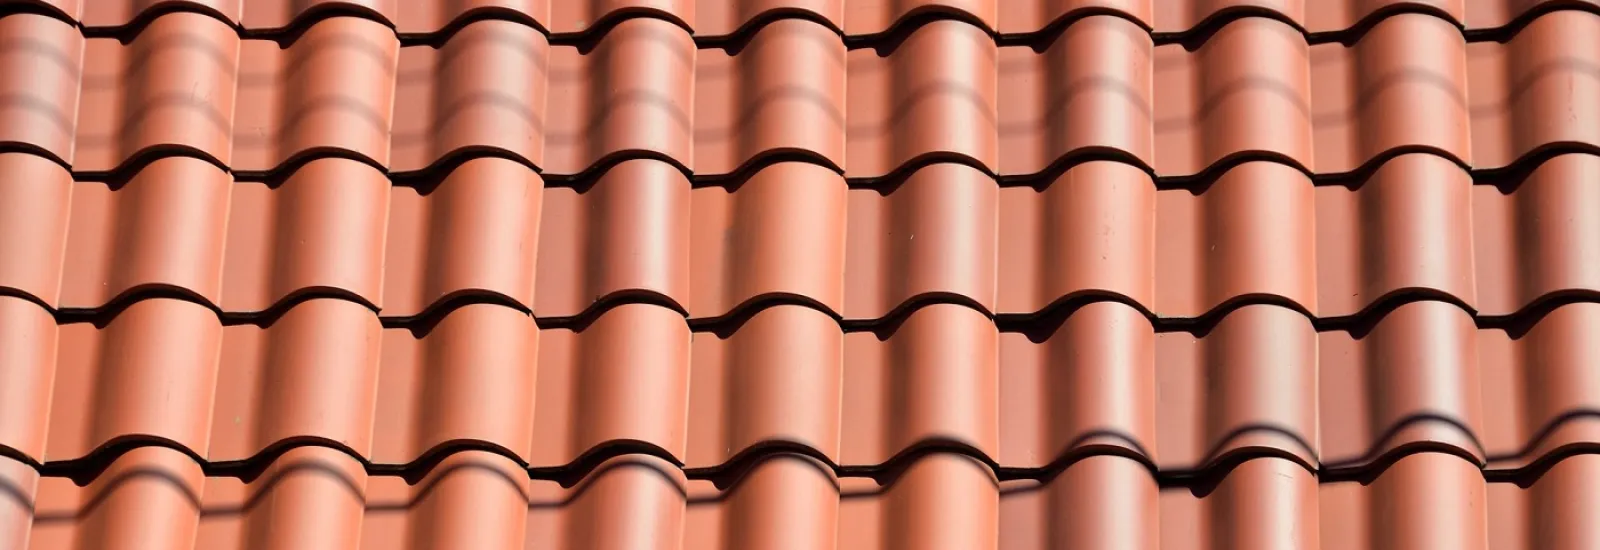 What Are the Best Types of Roofs for South Florida?